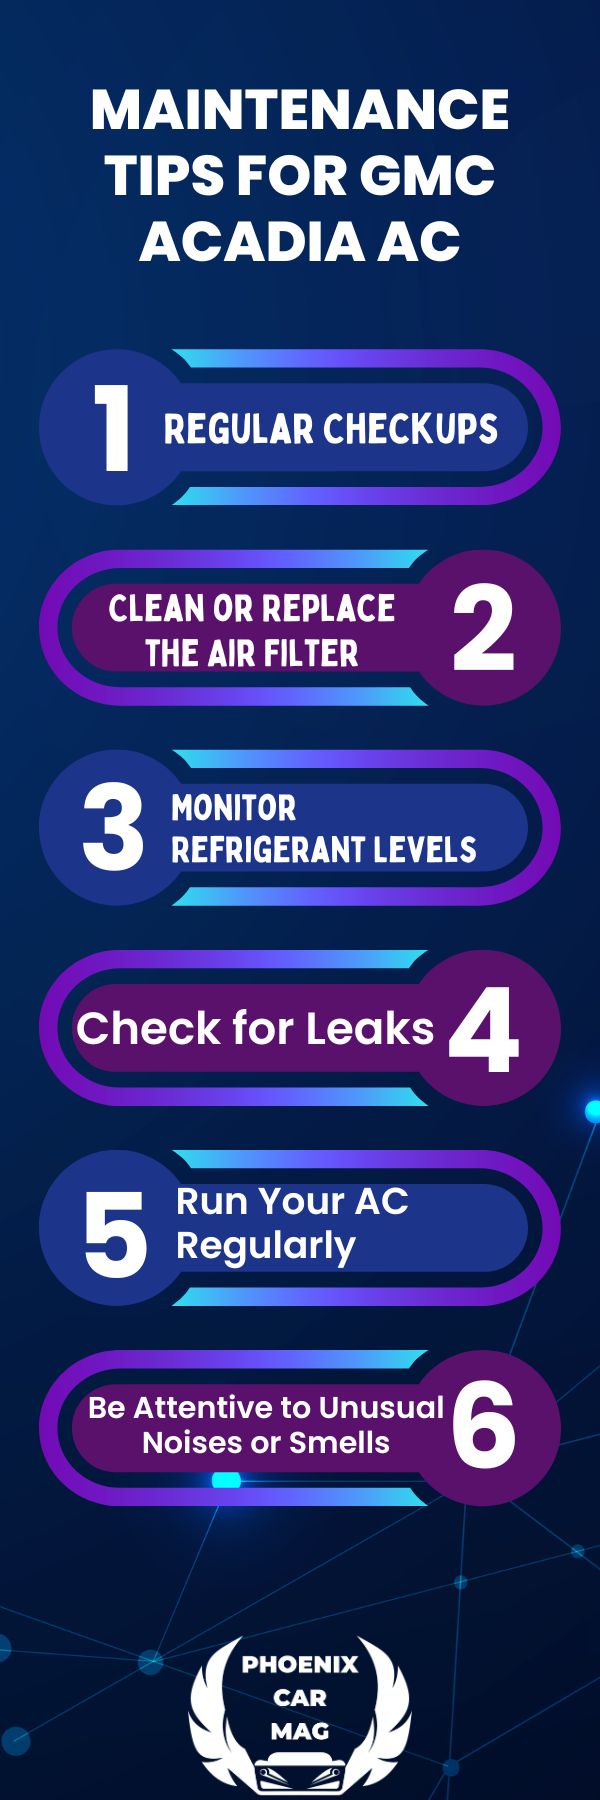 an infographic for Maintenance Tips for GMC Acadia AC